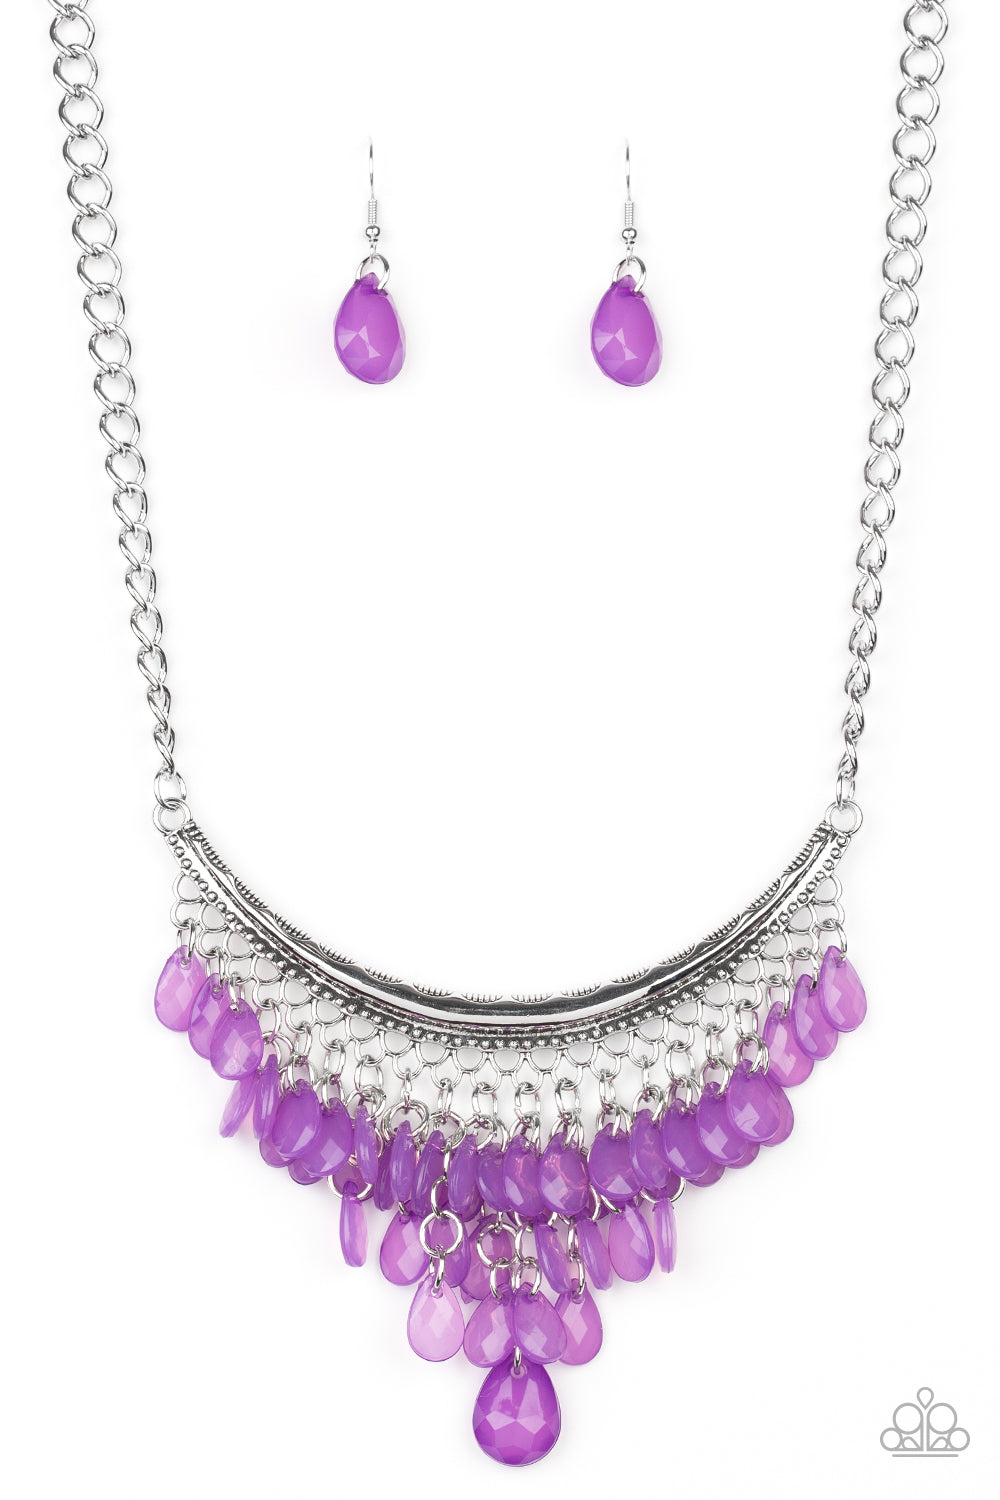 Varying in size, opaque purple teardrops drip from the bottom of a bowing silver bar, creating an effervescent fringe below the collar. Features an adjustable clasp closure.